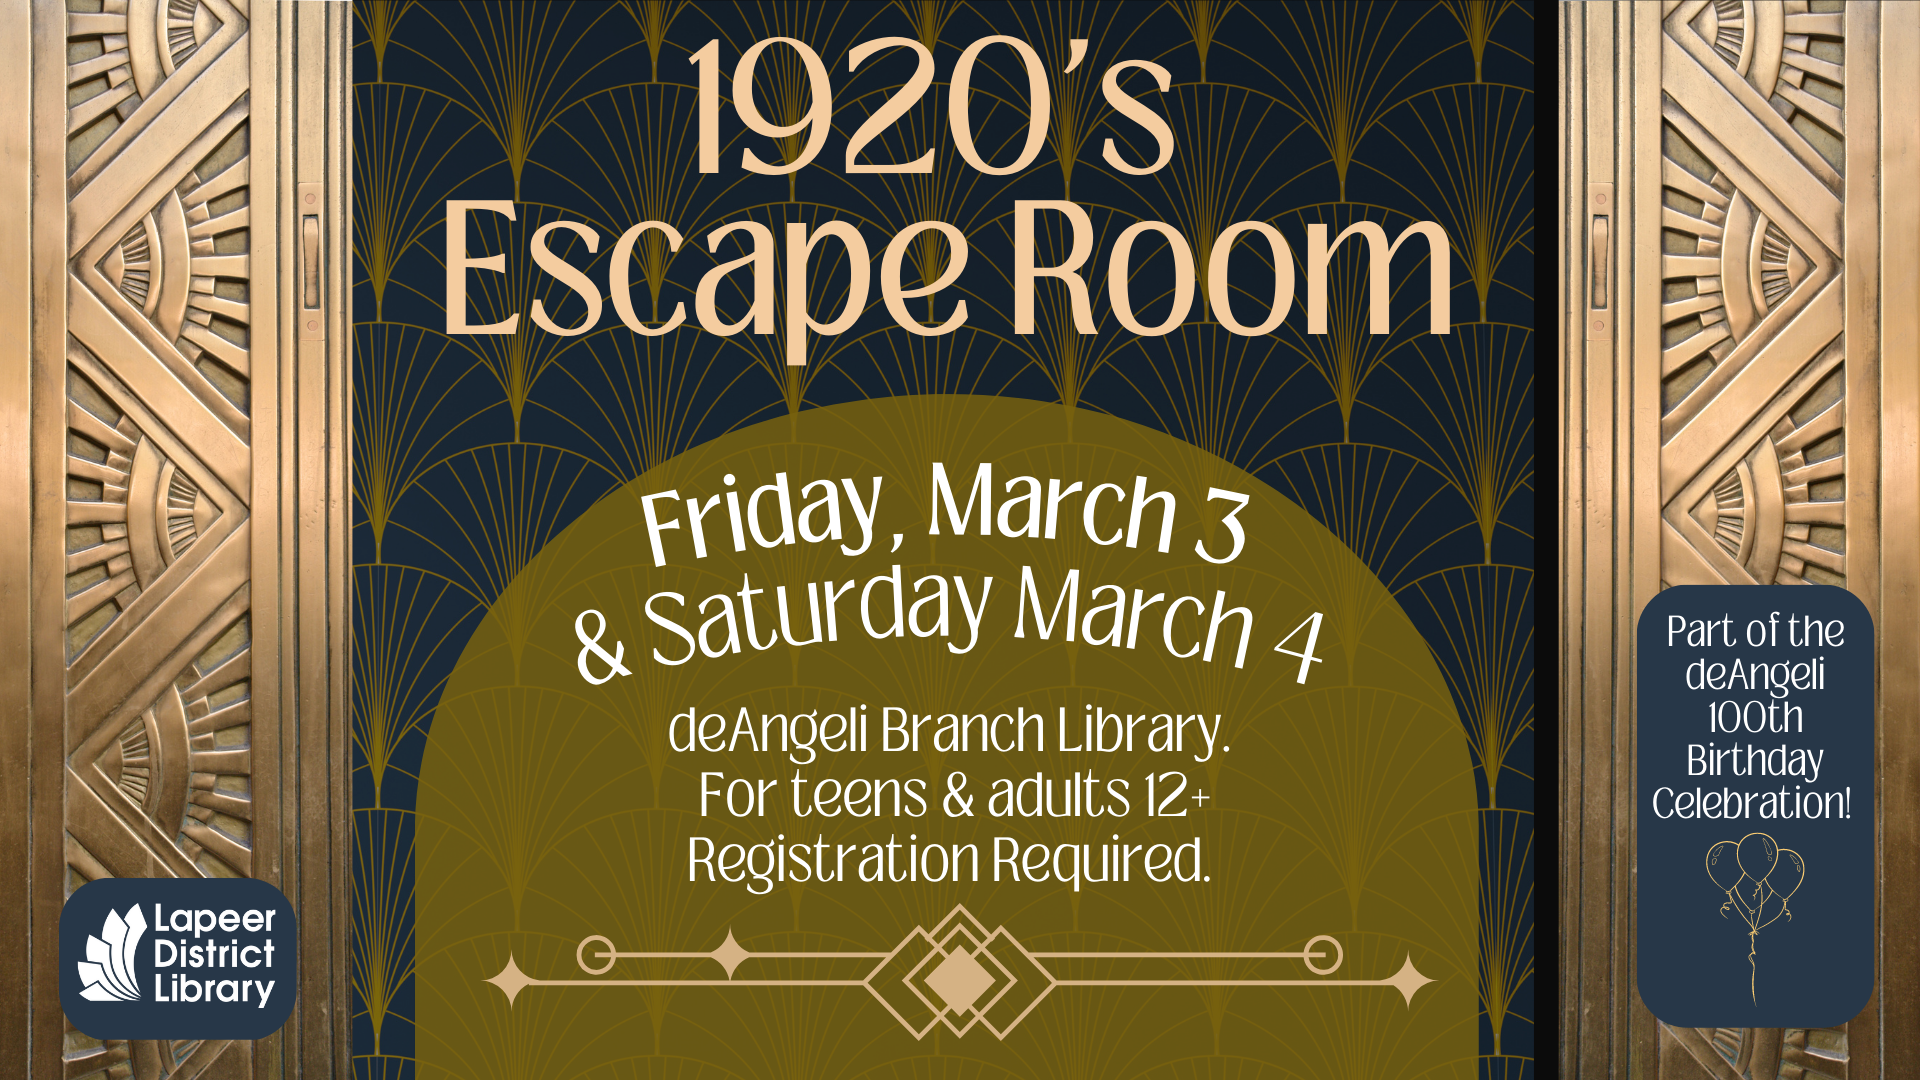 Friday, March 3 1920's  Escape Room & Saturday March 4 deAngeli Branch Library.  For teens & adults 12+ Registration Required. Part of the deAngeli 100th Birthday Celebration!